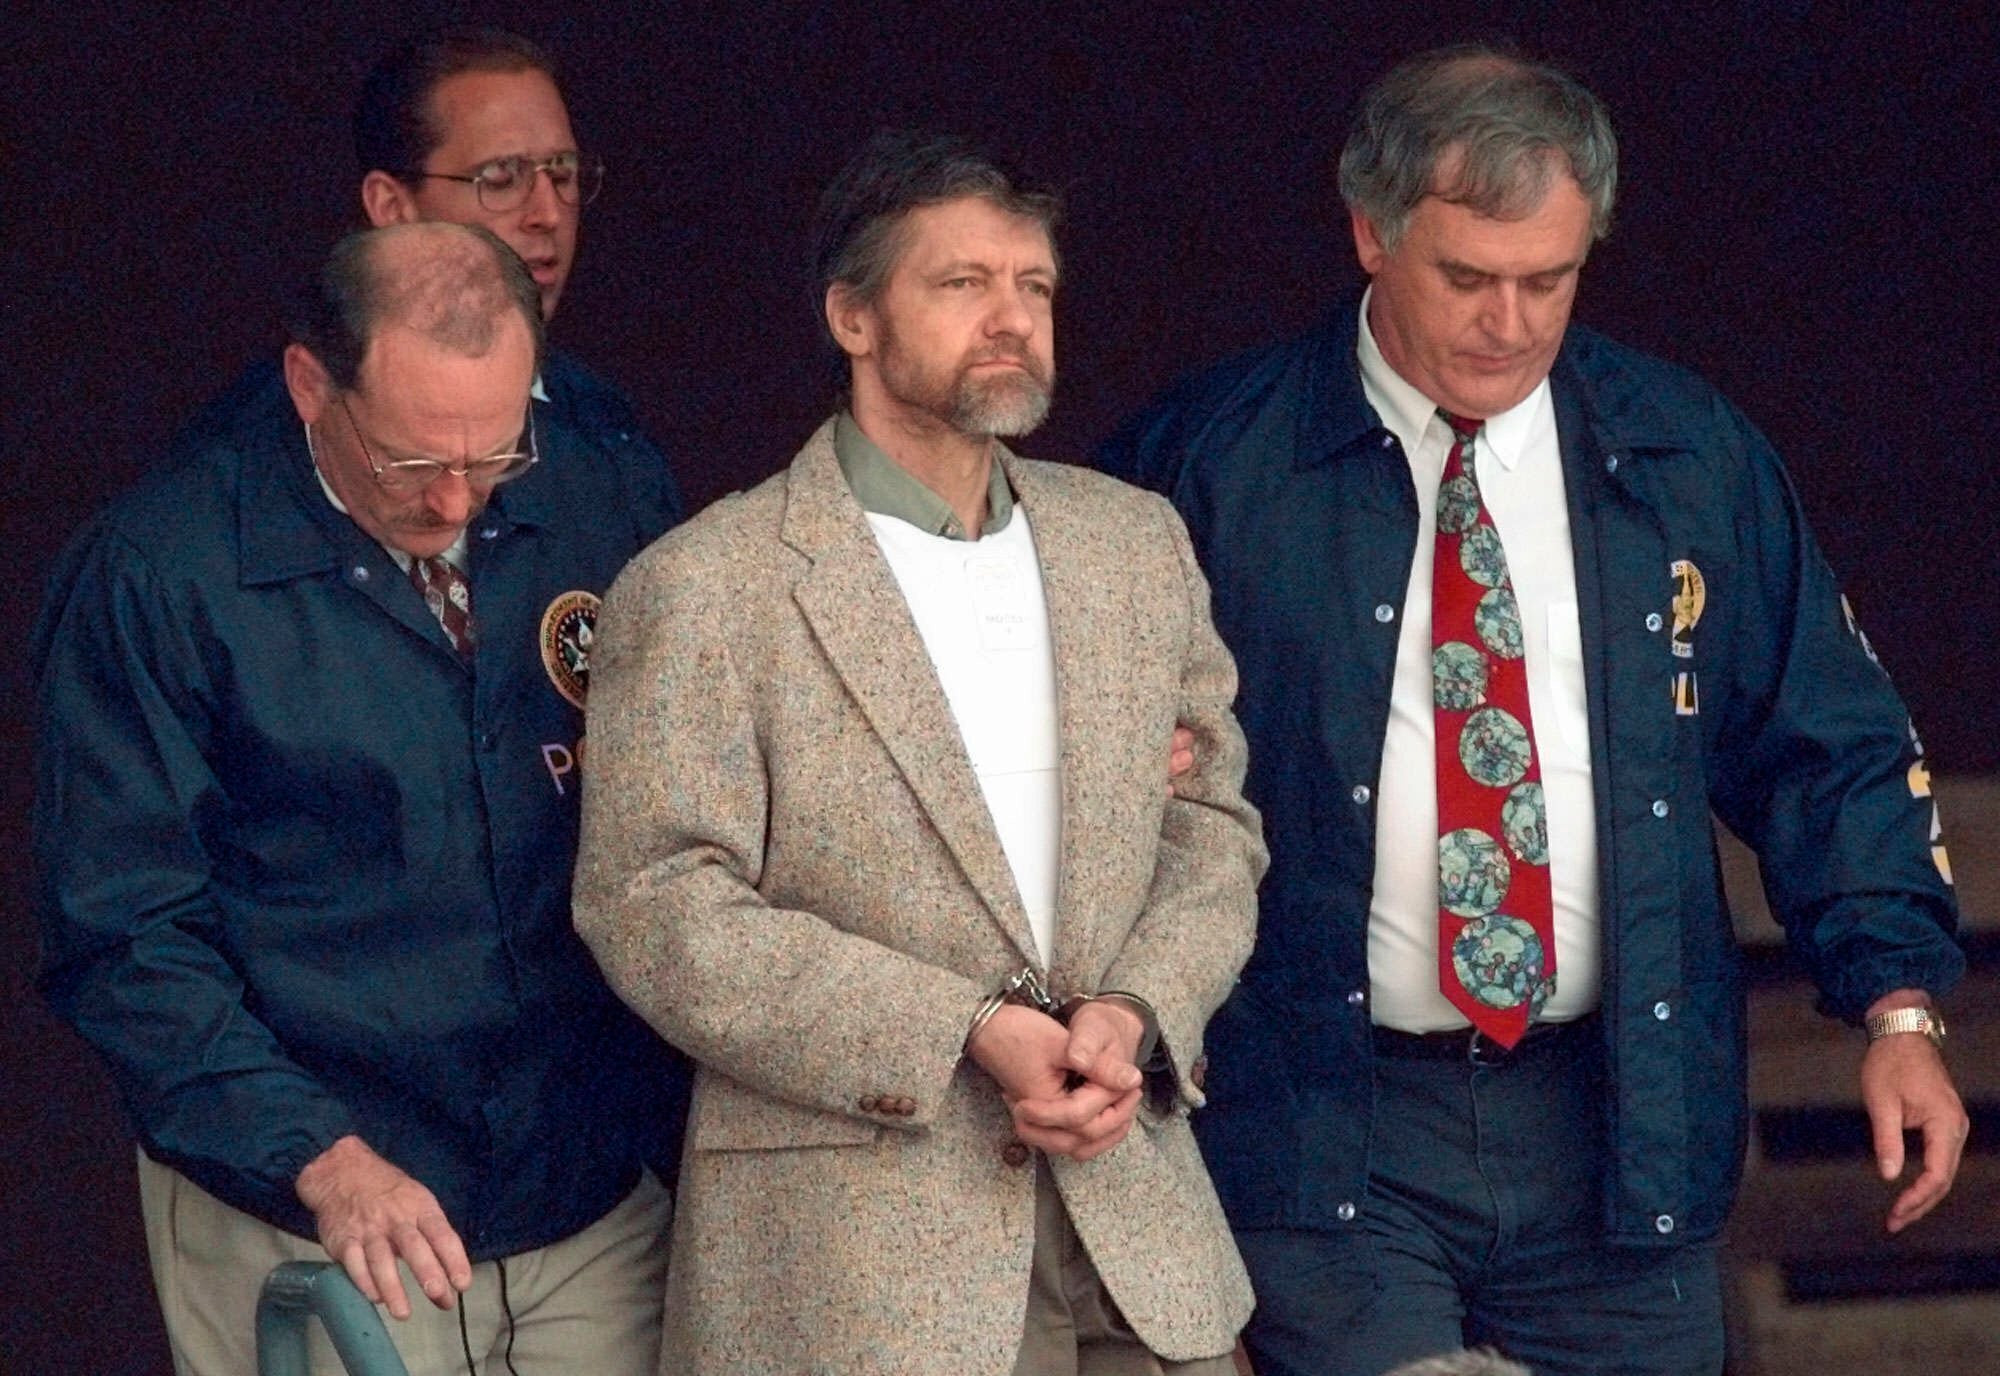 Ted Kaczynski flanked by federal agents in 1996